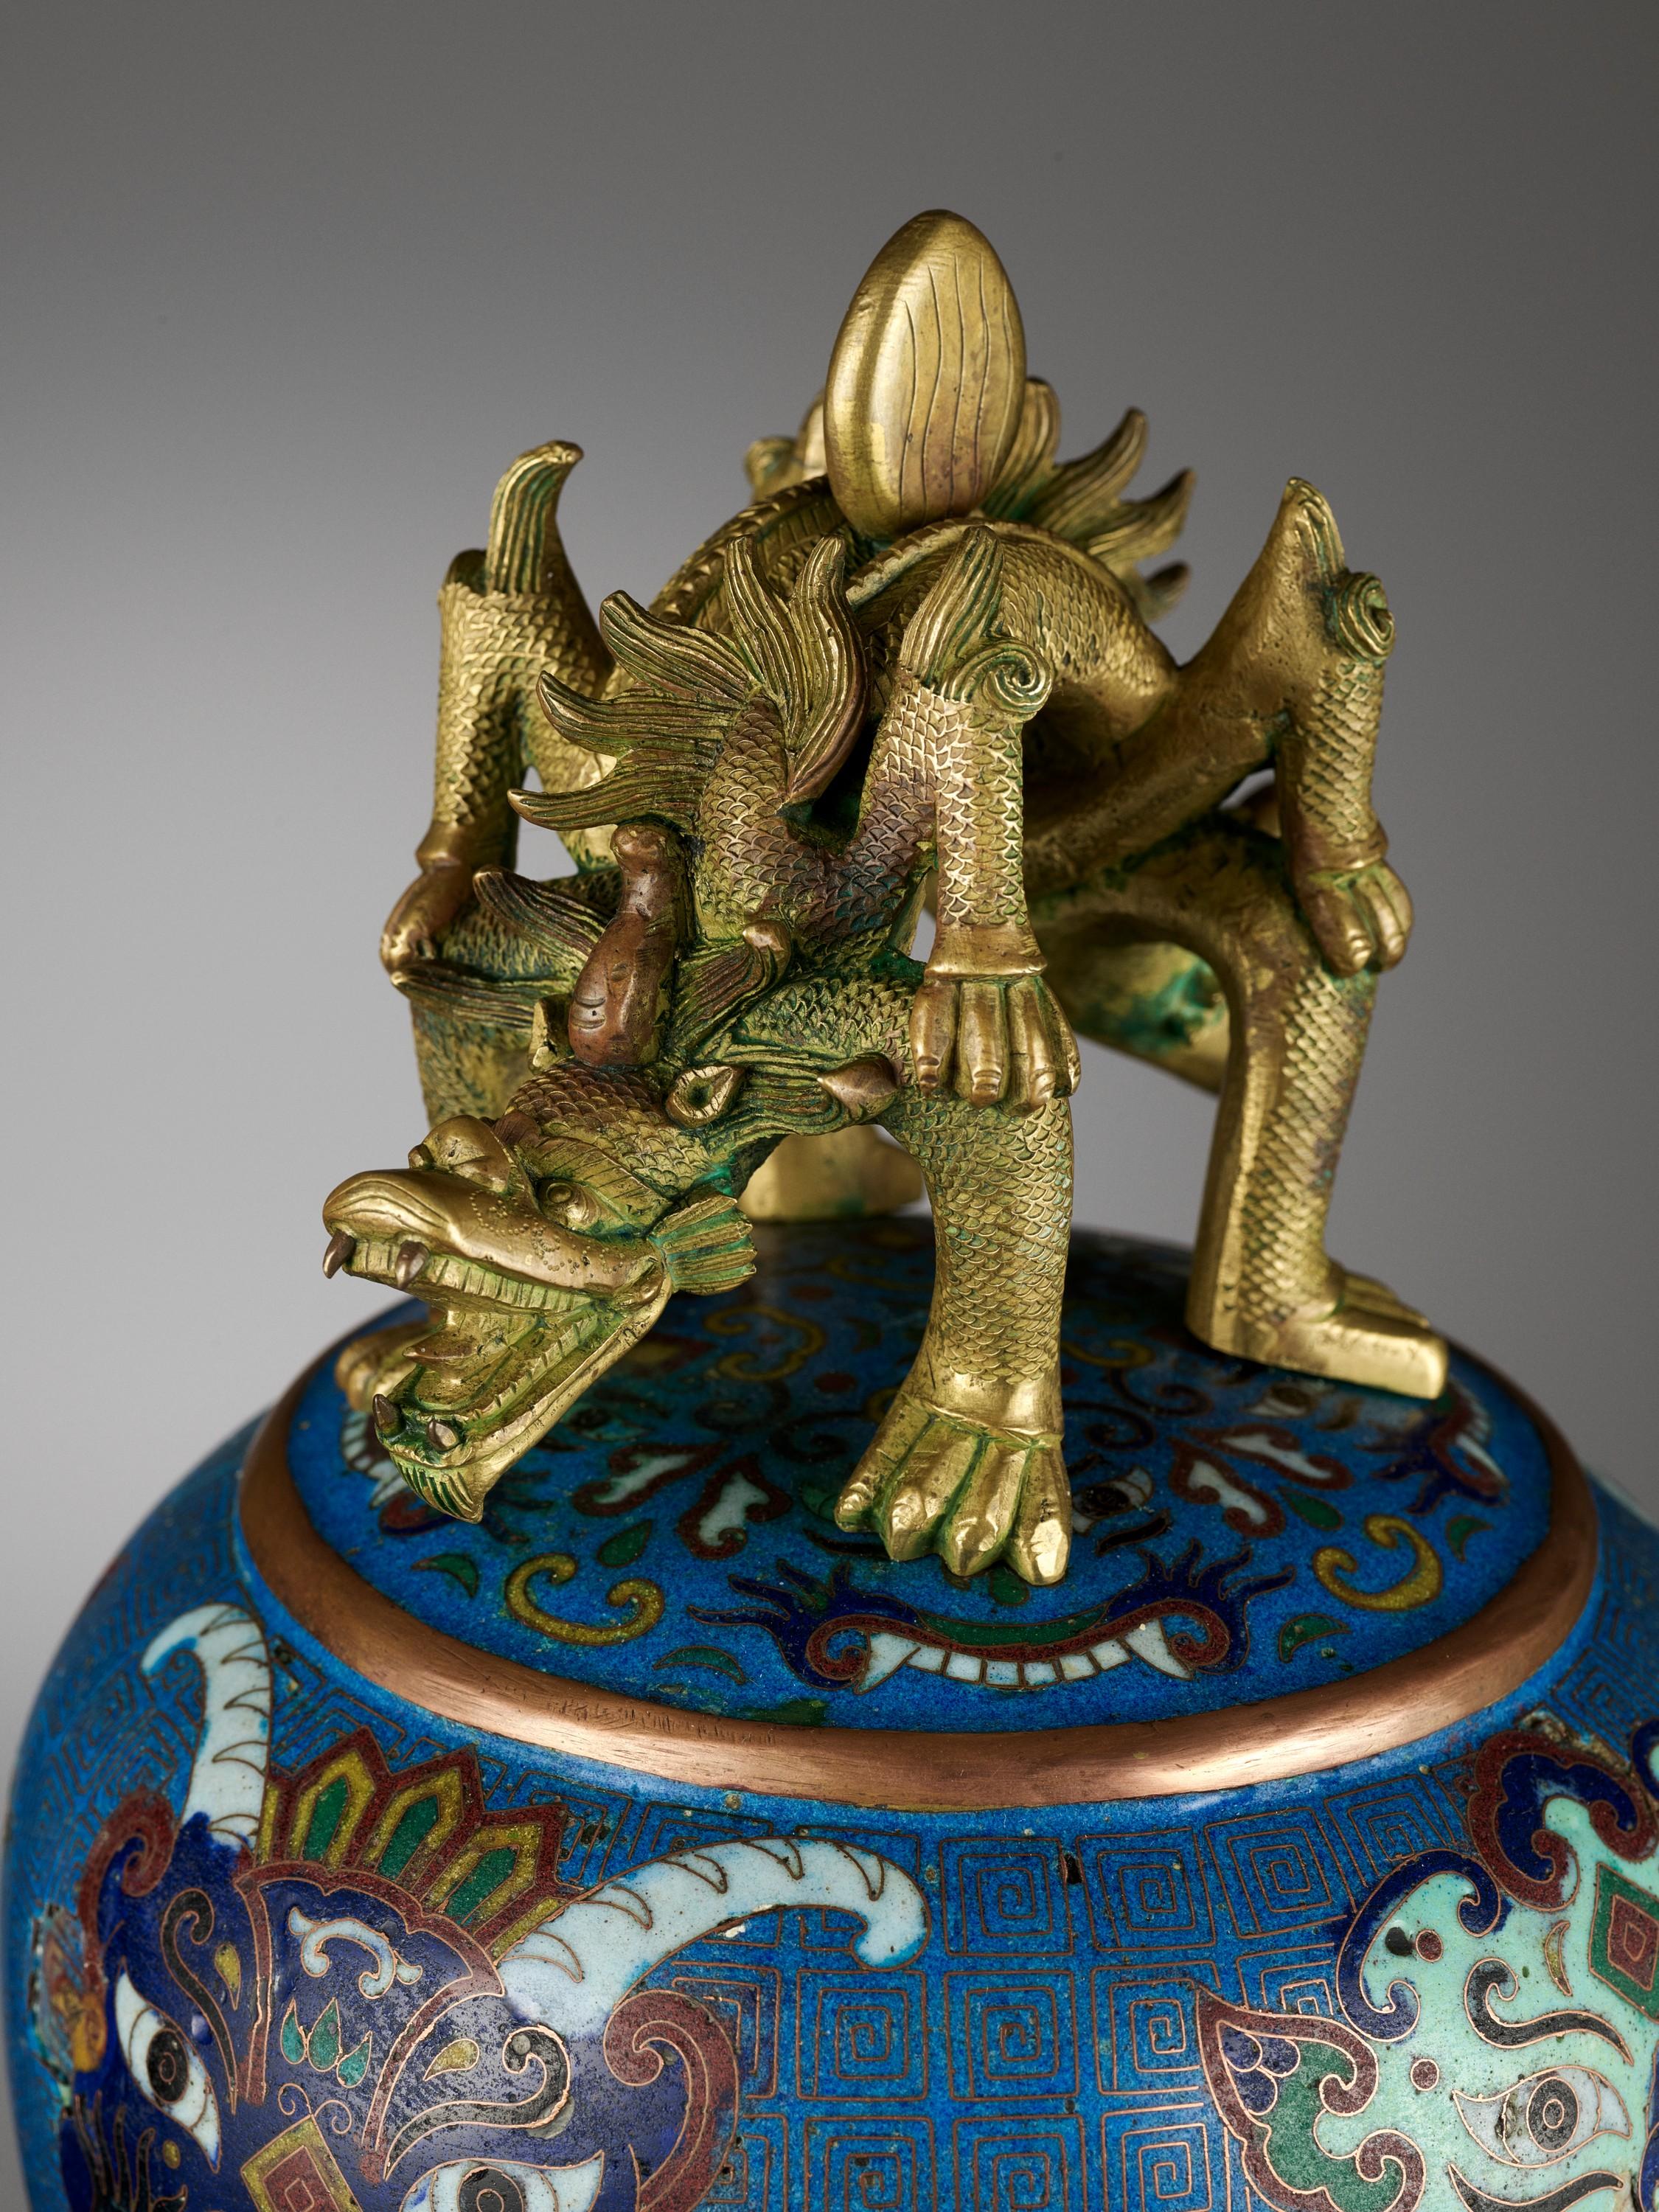 A cloisonné enamel bell, China, Qing Dynasty, 18th-19th century

Of flared form with a lobed bottom edge, an upper register of elaborate taotie masks on a key fret ground above stylized chilong, and a lower register of taotie masks and archaistic